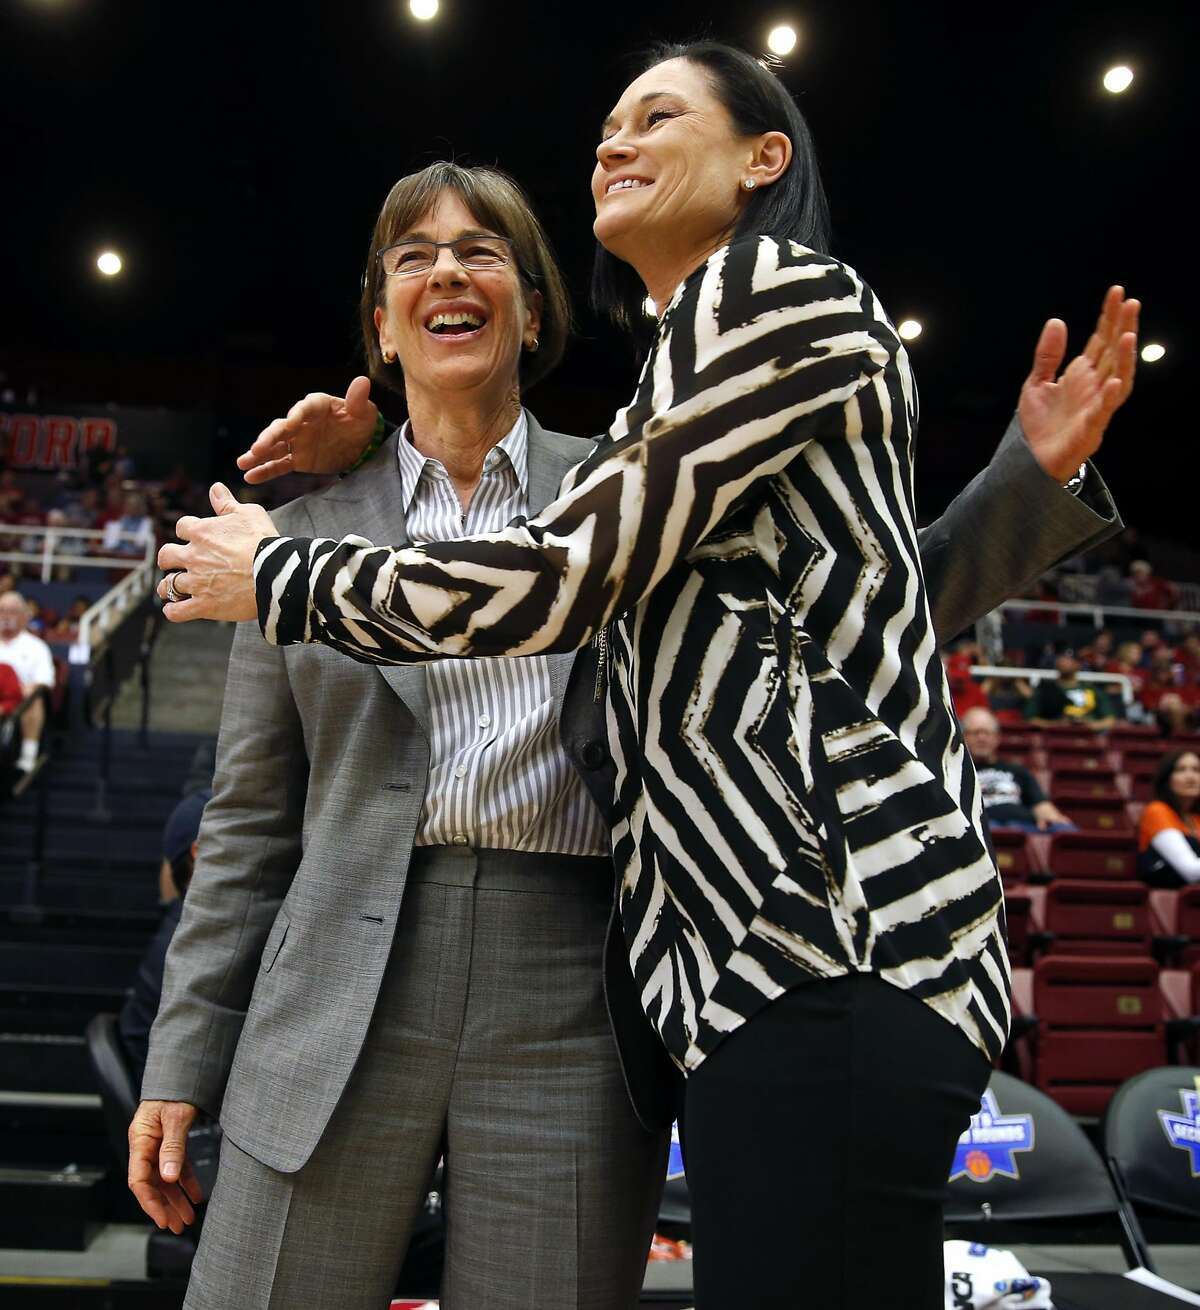 Stanford head coach Tara VanDerveer (left) and San Francisco head coach Jennifer Azzi embrace before their team's faced off during 2016 NCAA Division 1 Women's Basketball Tournament game at Maples Pavilion in Stanford, Calif., on Saturday, March 19, 2016.